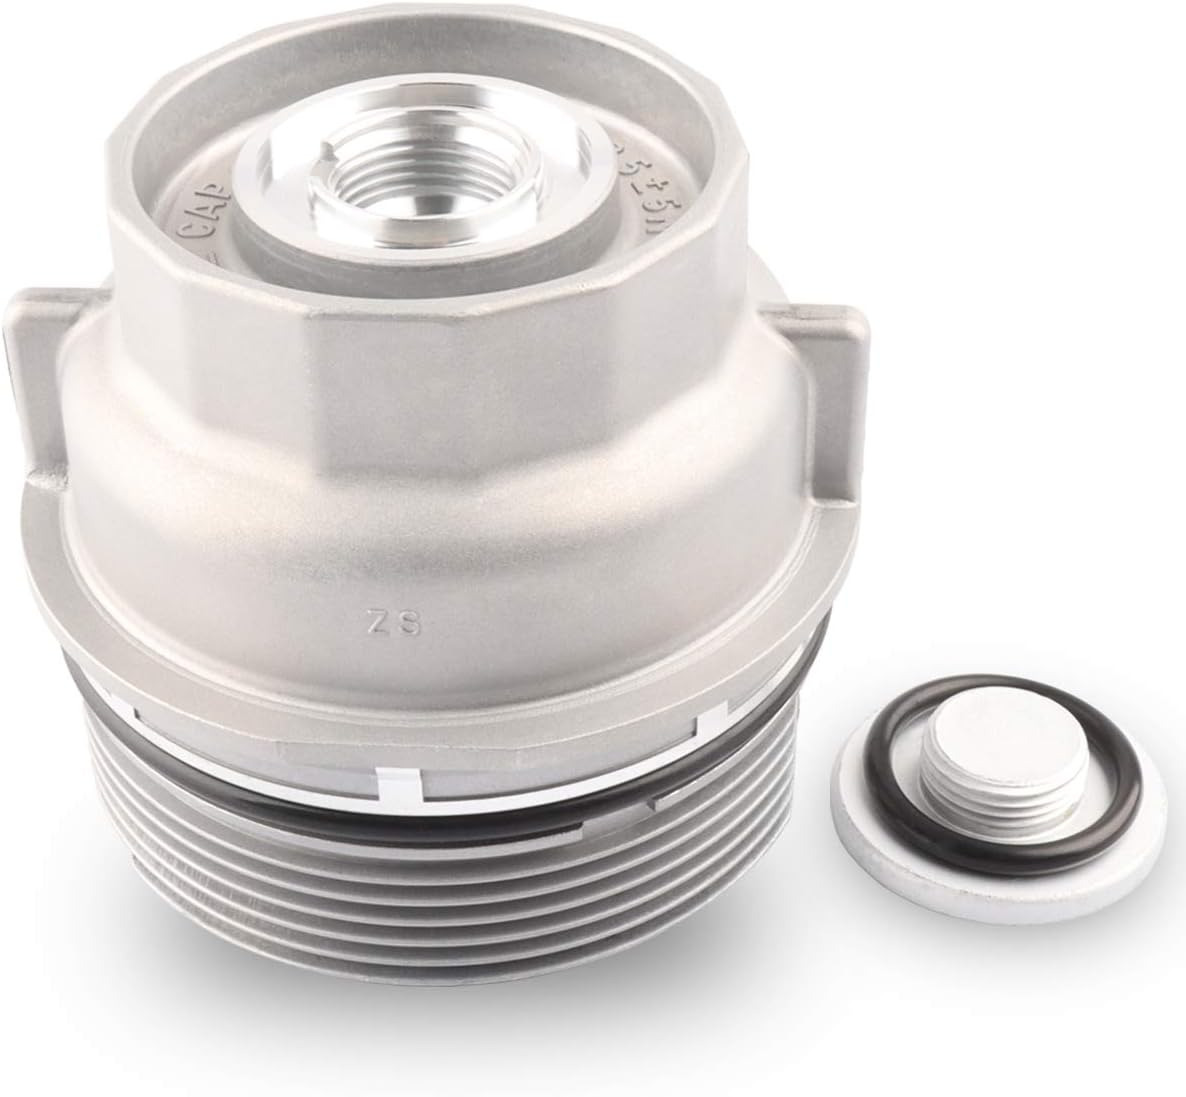 Oil Filter Housing Cap Assembly, Replace 15620-31060, 1562031060 Compatible with